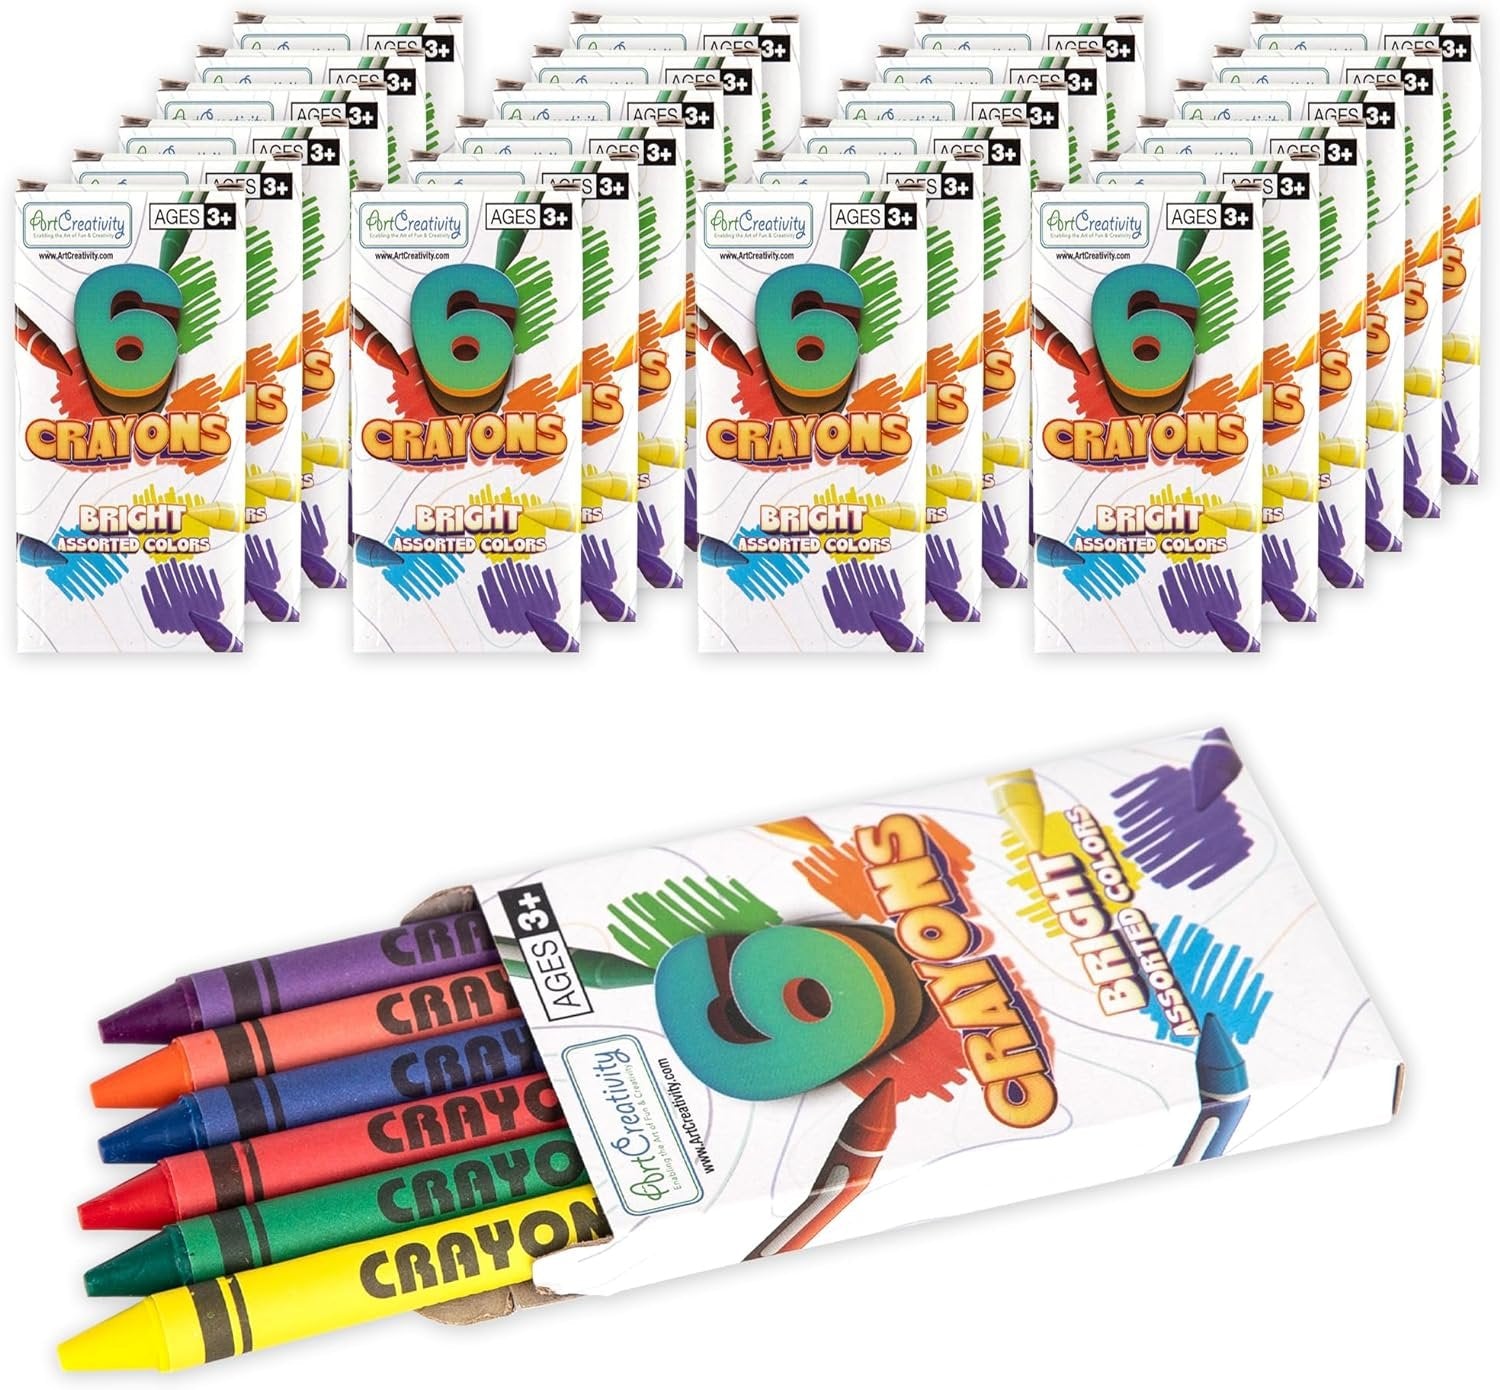  ArtCreativity Mini Crayon Sets for Kids, 12 Pack, Contain 8 Mini  Crayons in Each Set, Mini Crayon Packs for Arts and Crafts, Great as Crayon  Party Favors, Goodie Bag Stuffers, and